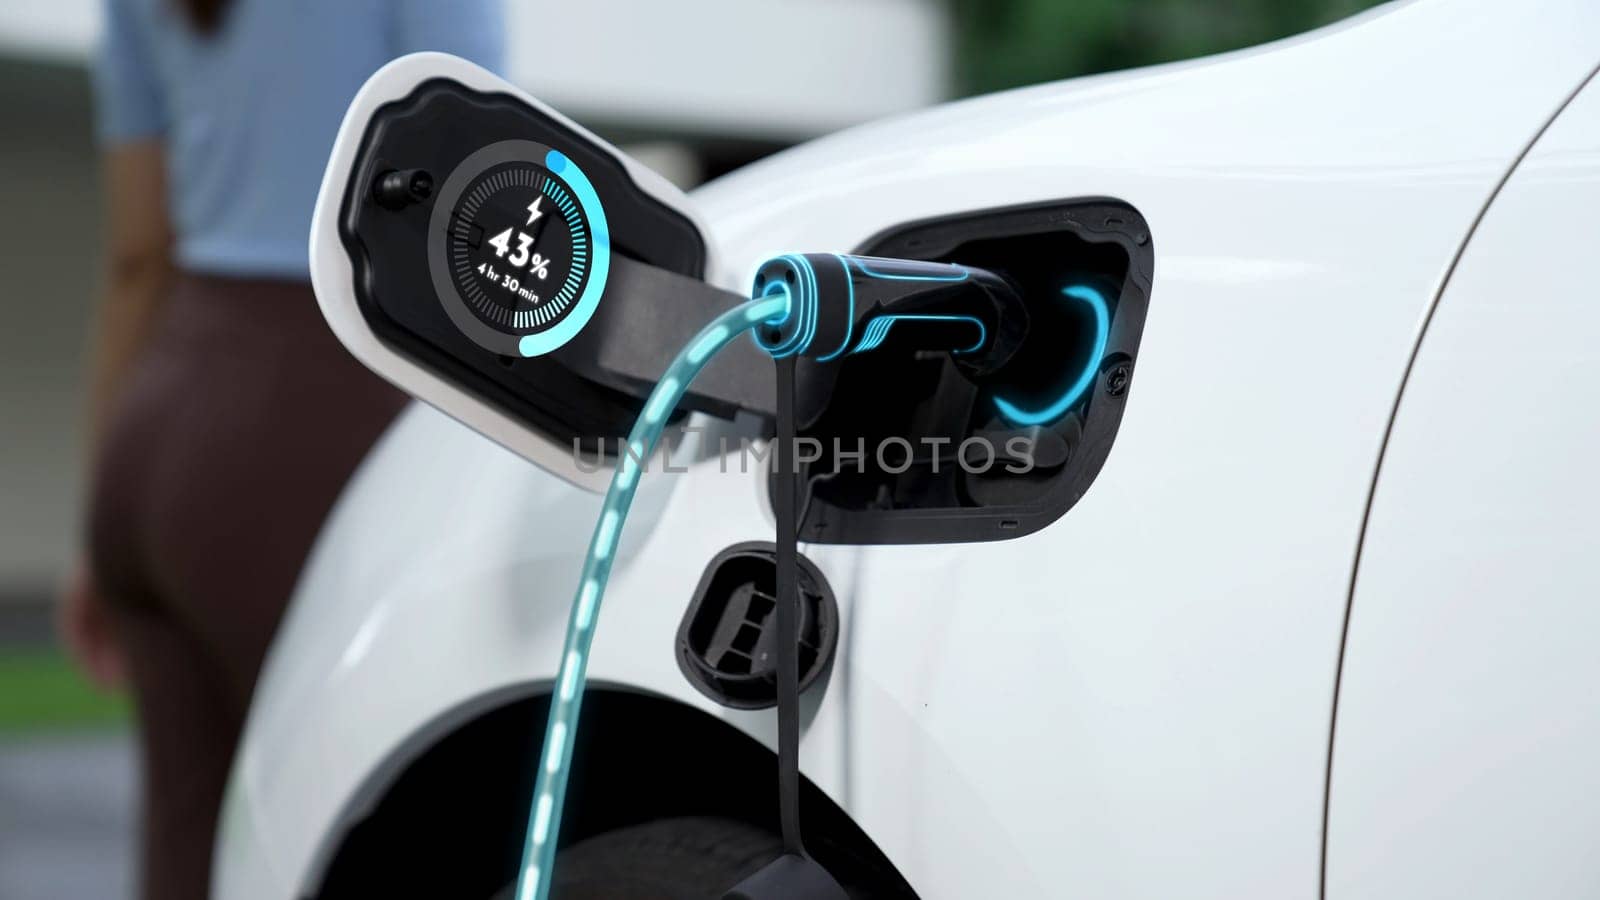 EV charger from home charging station plug in and recharging EV car display battery status hologram with blurred background of modern woman walking. Smart futuristic home energy infrastructure. Peruse